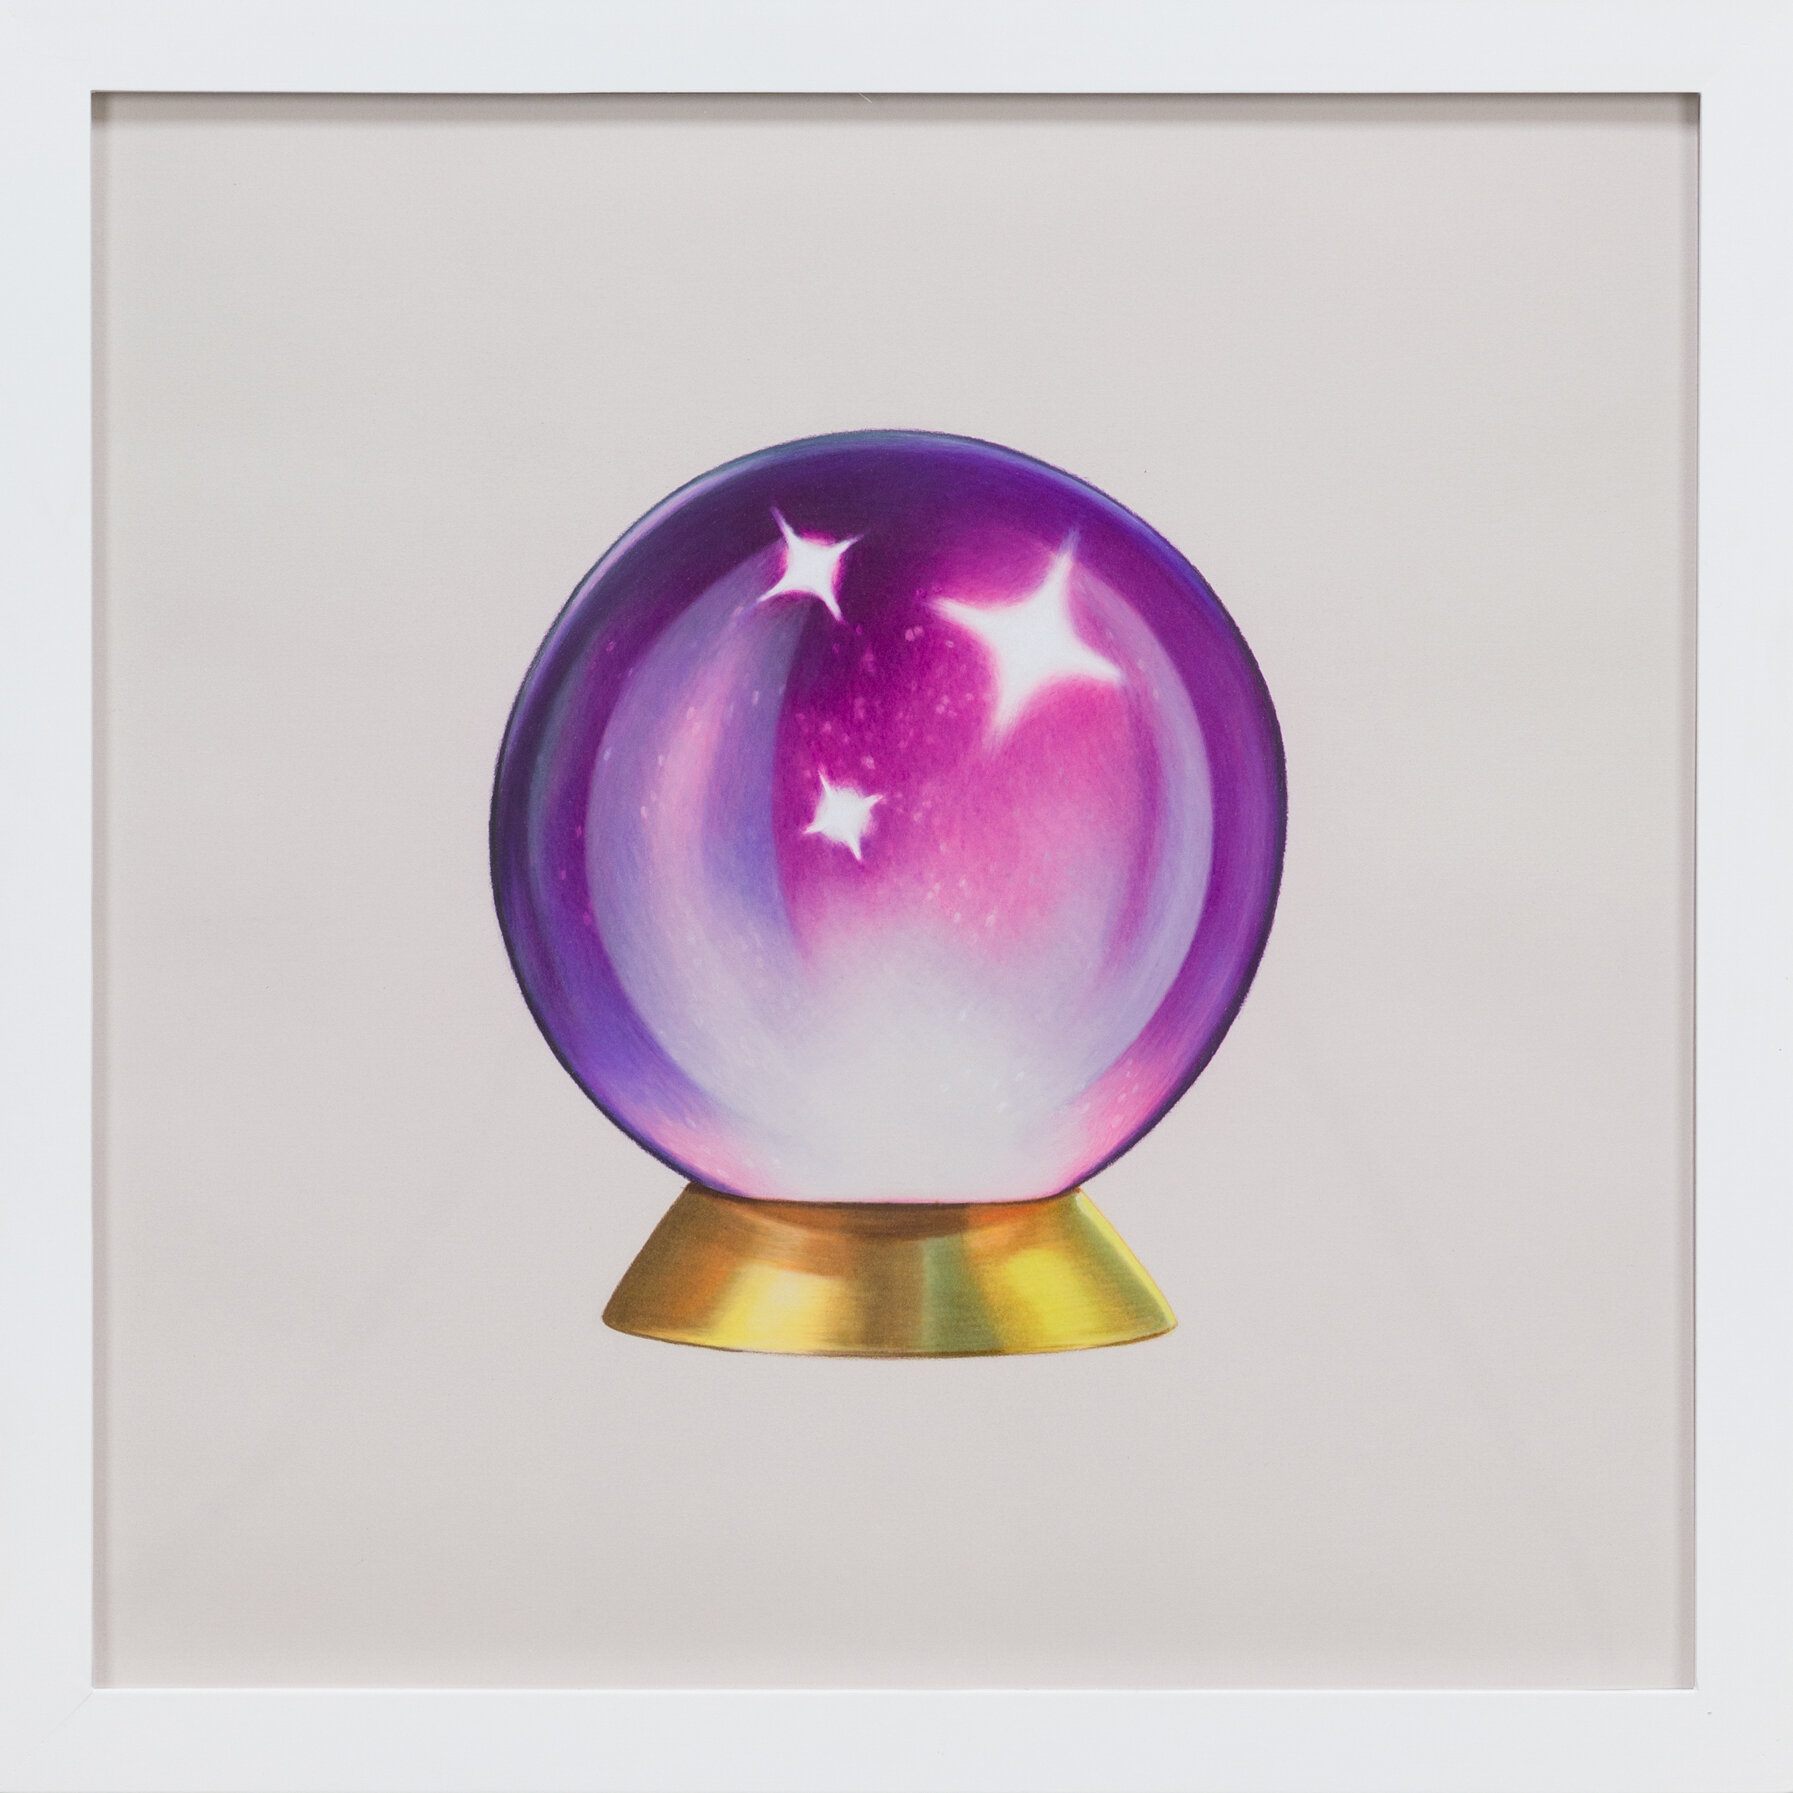   Crystal Ball, July 13, 2017 , 2017 colored pencil on paper 19.25 x 19.25"   Inquire &gt;   